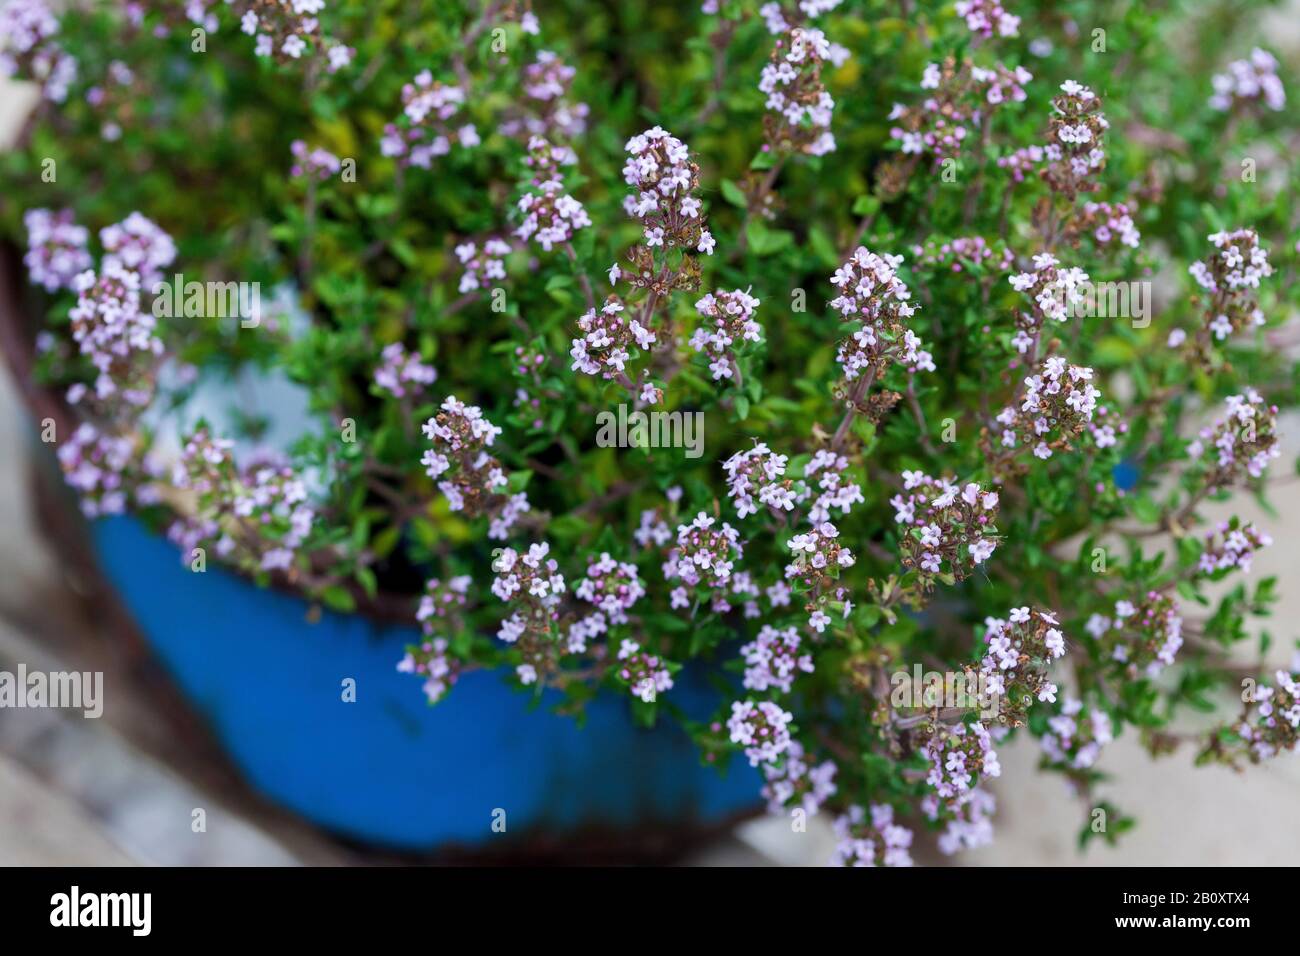 Garden thyme, English thyme, Common thyme (Thymus vulgaris), blooming in a pot, Germany Stock Photo